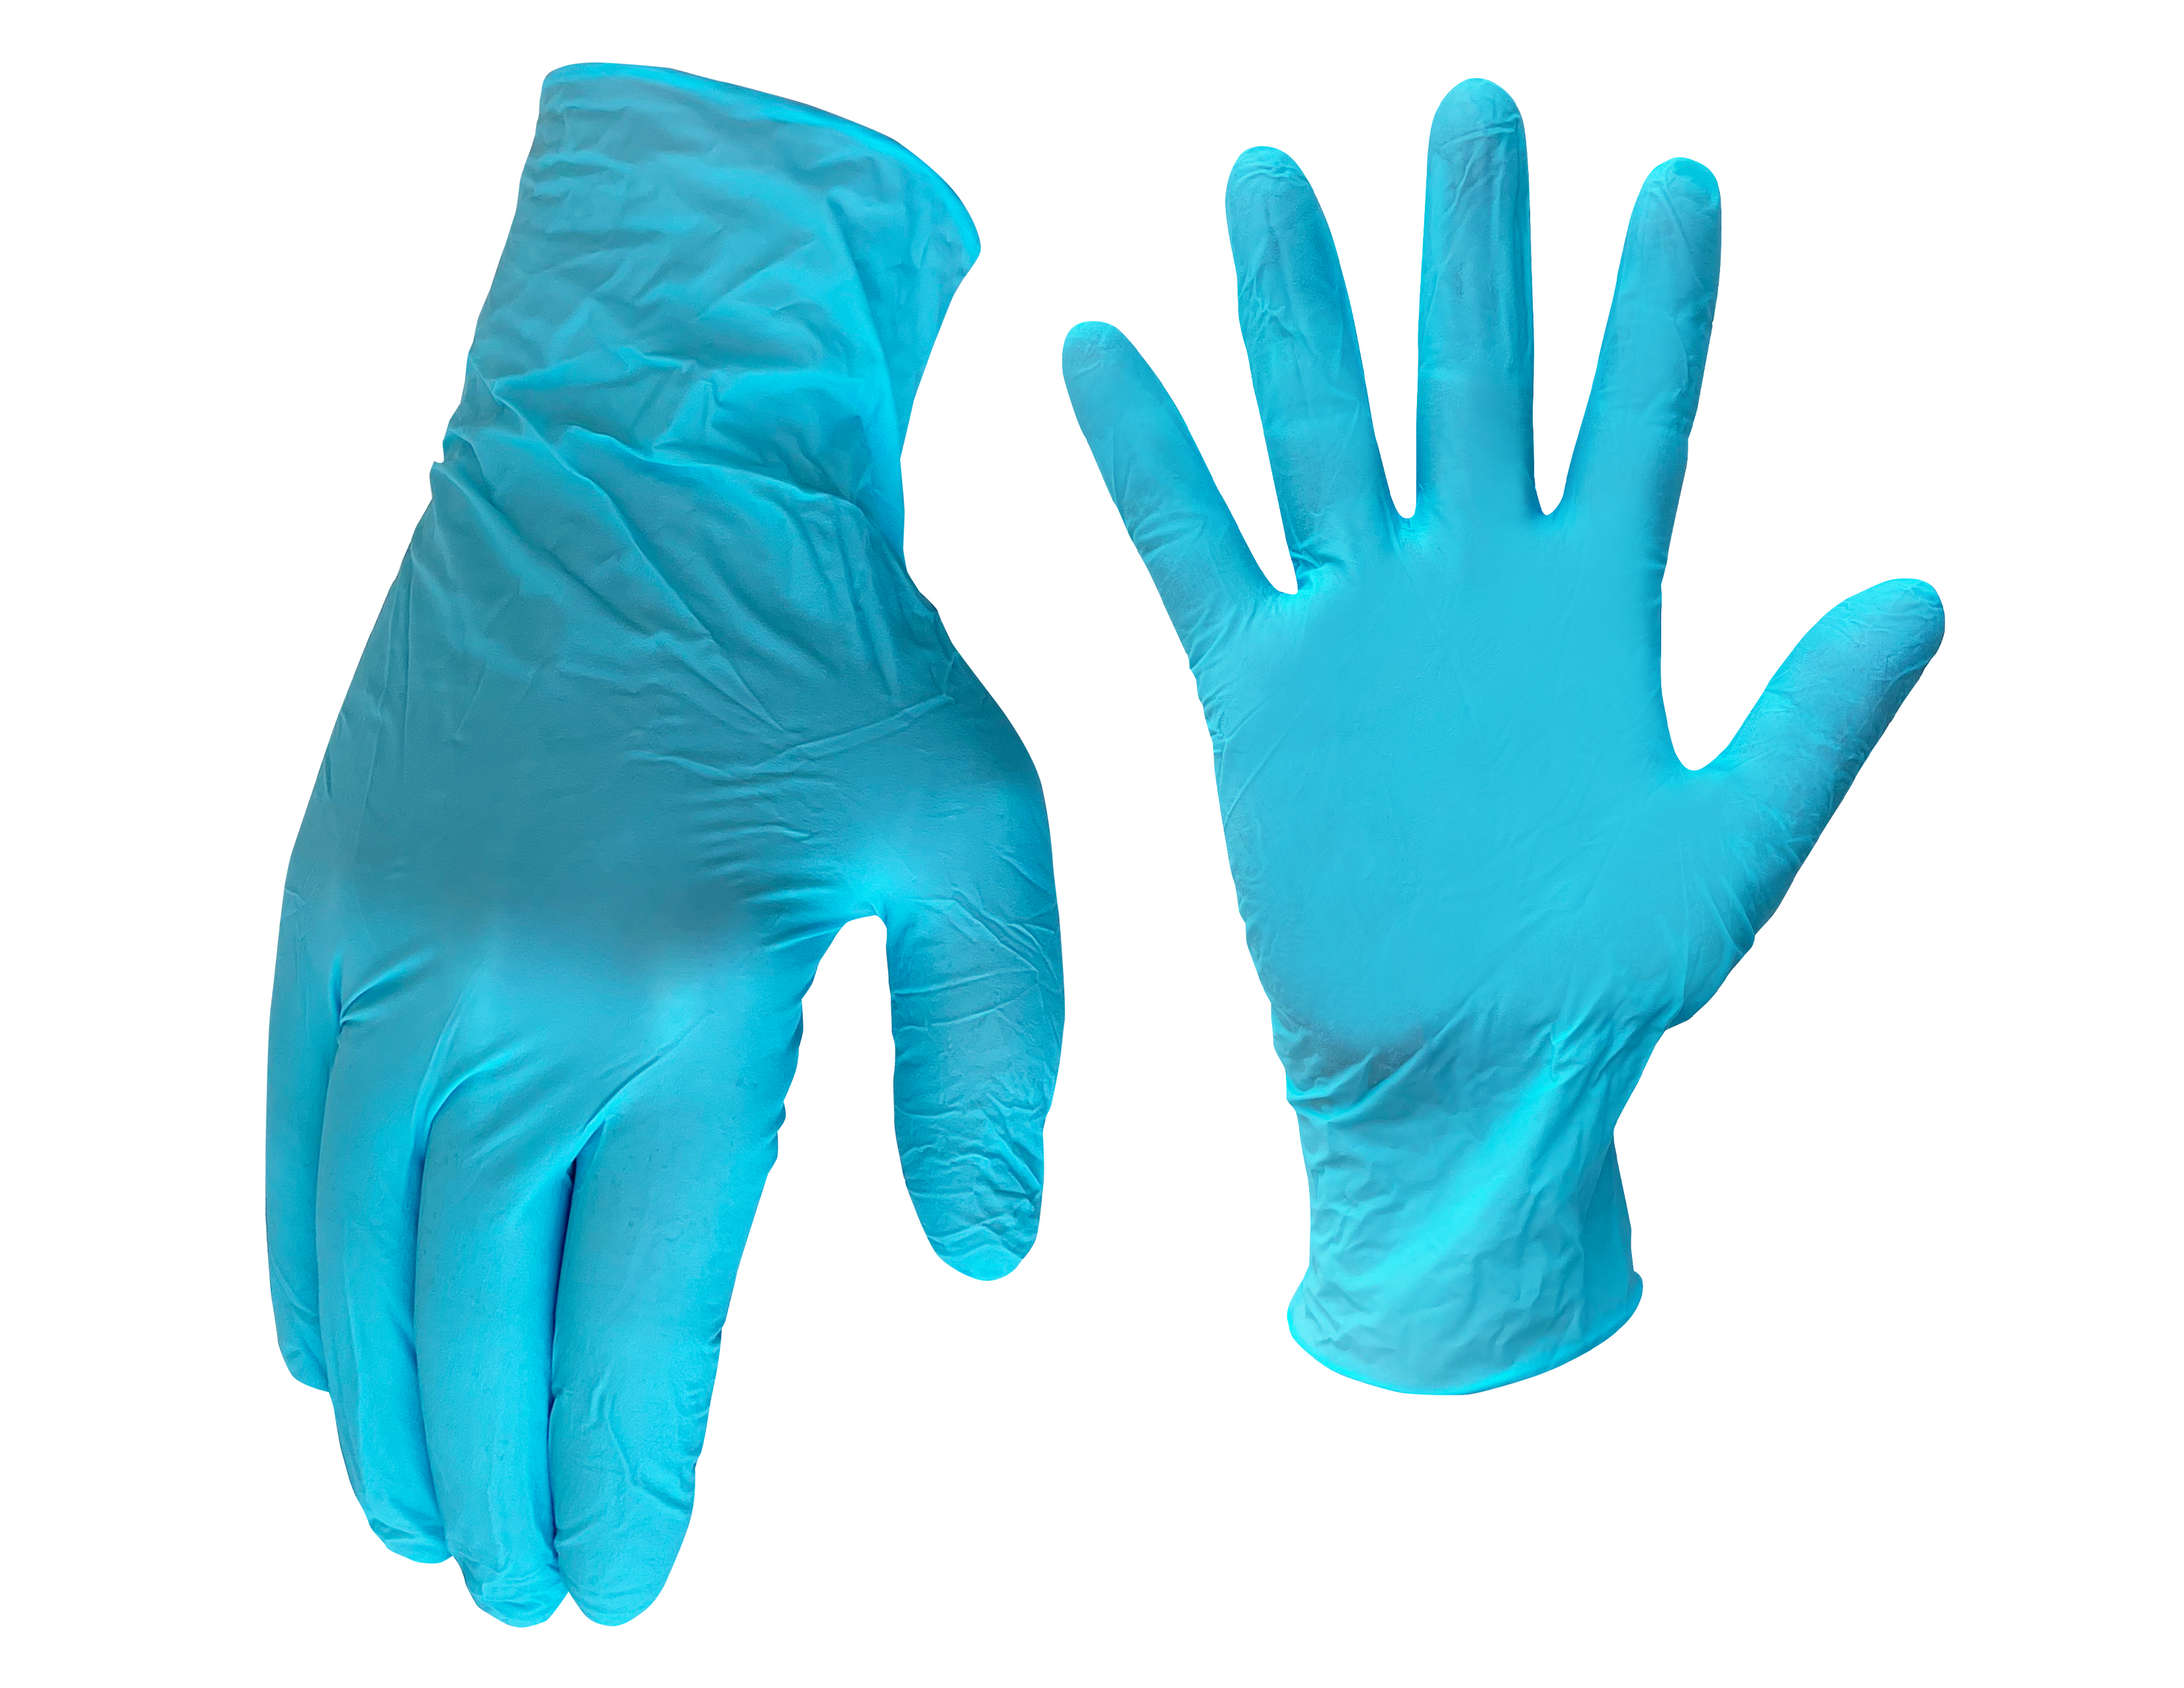 AWP Pro Paint 49810-14 Disposable Gloves, Nitrile, Blue, One Size, 50 Count - image 2 of 6